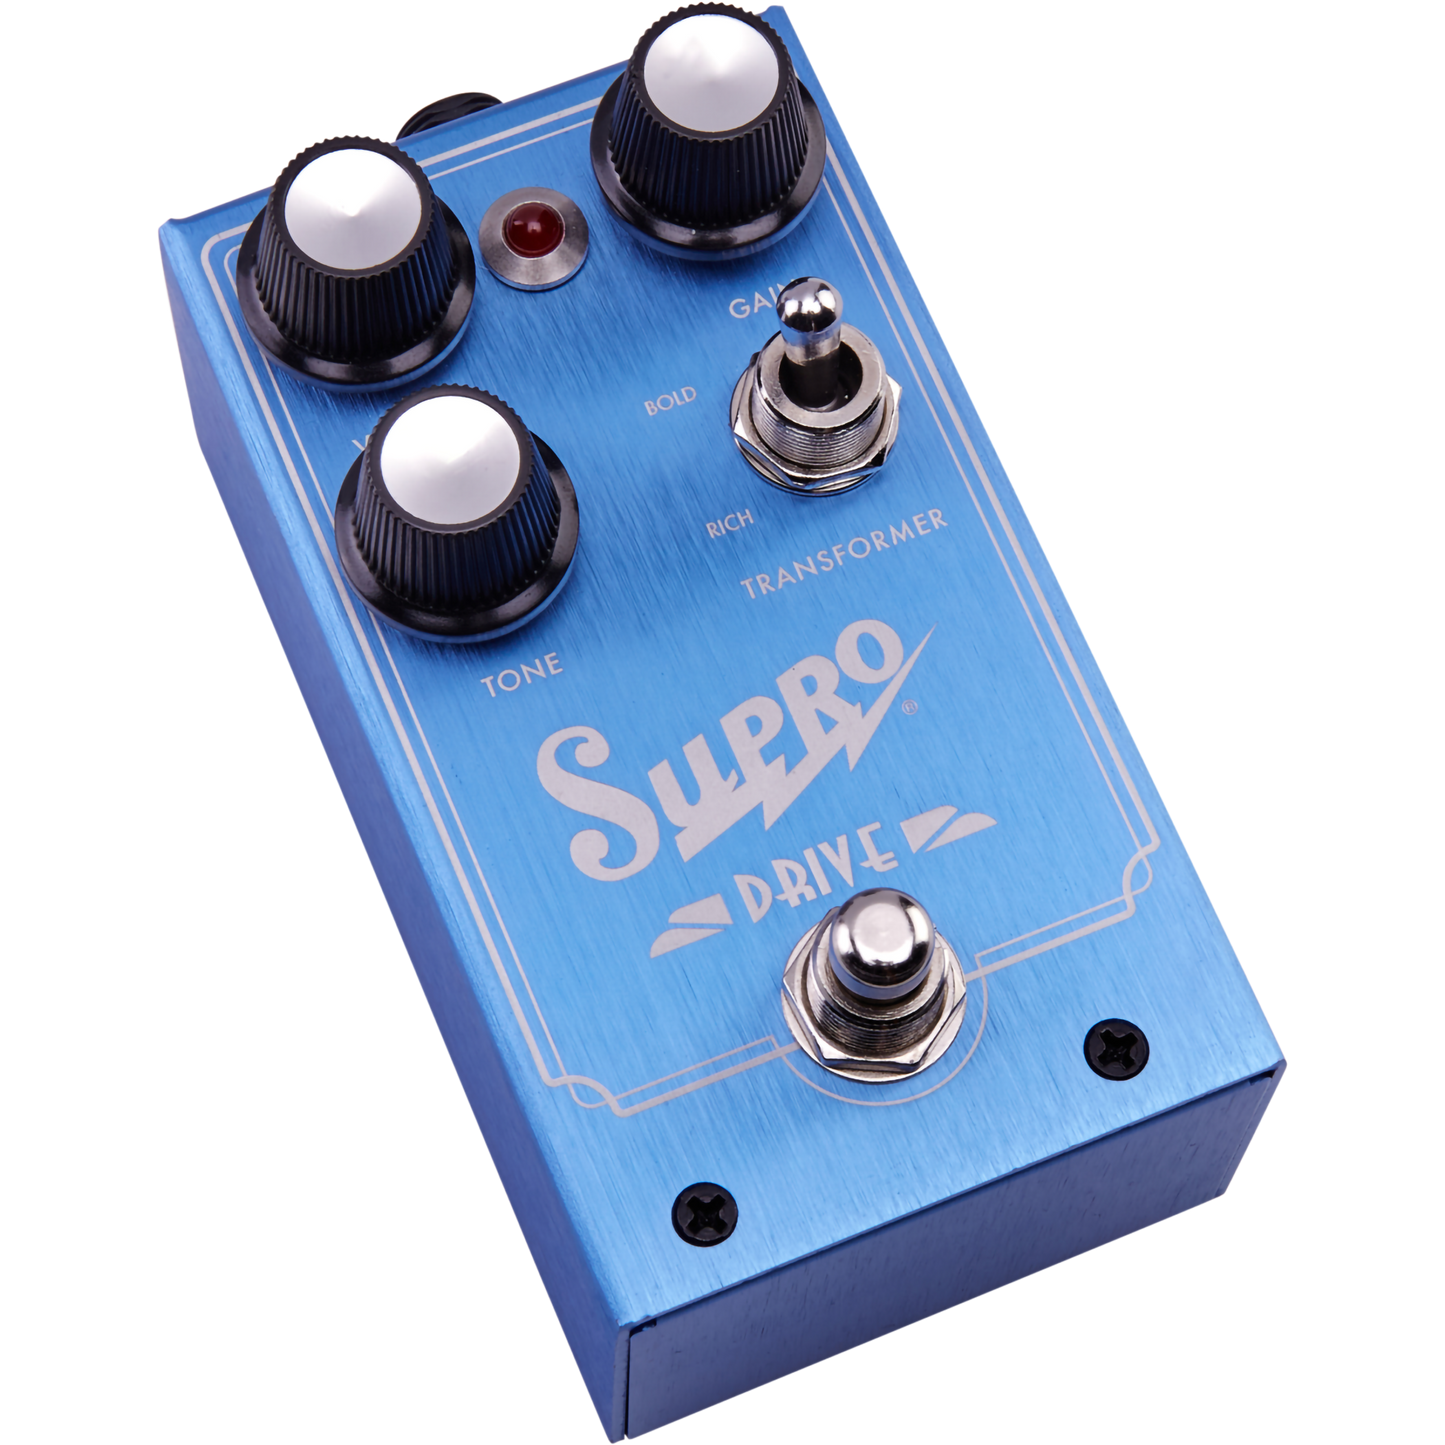 Supro 1305 Overdrive Pedal